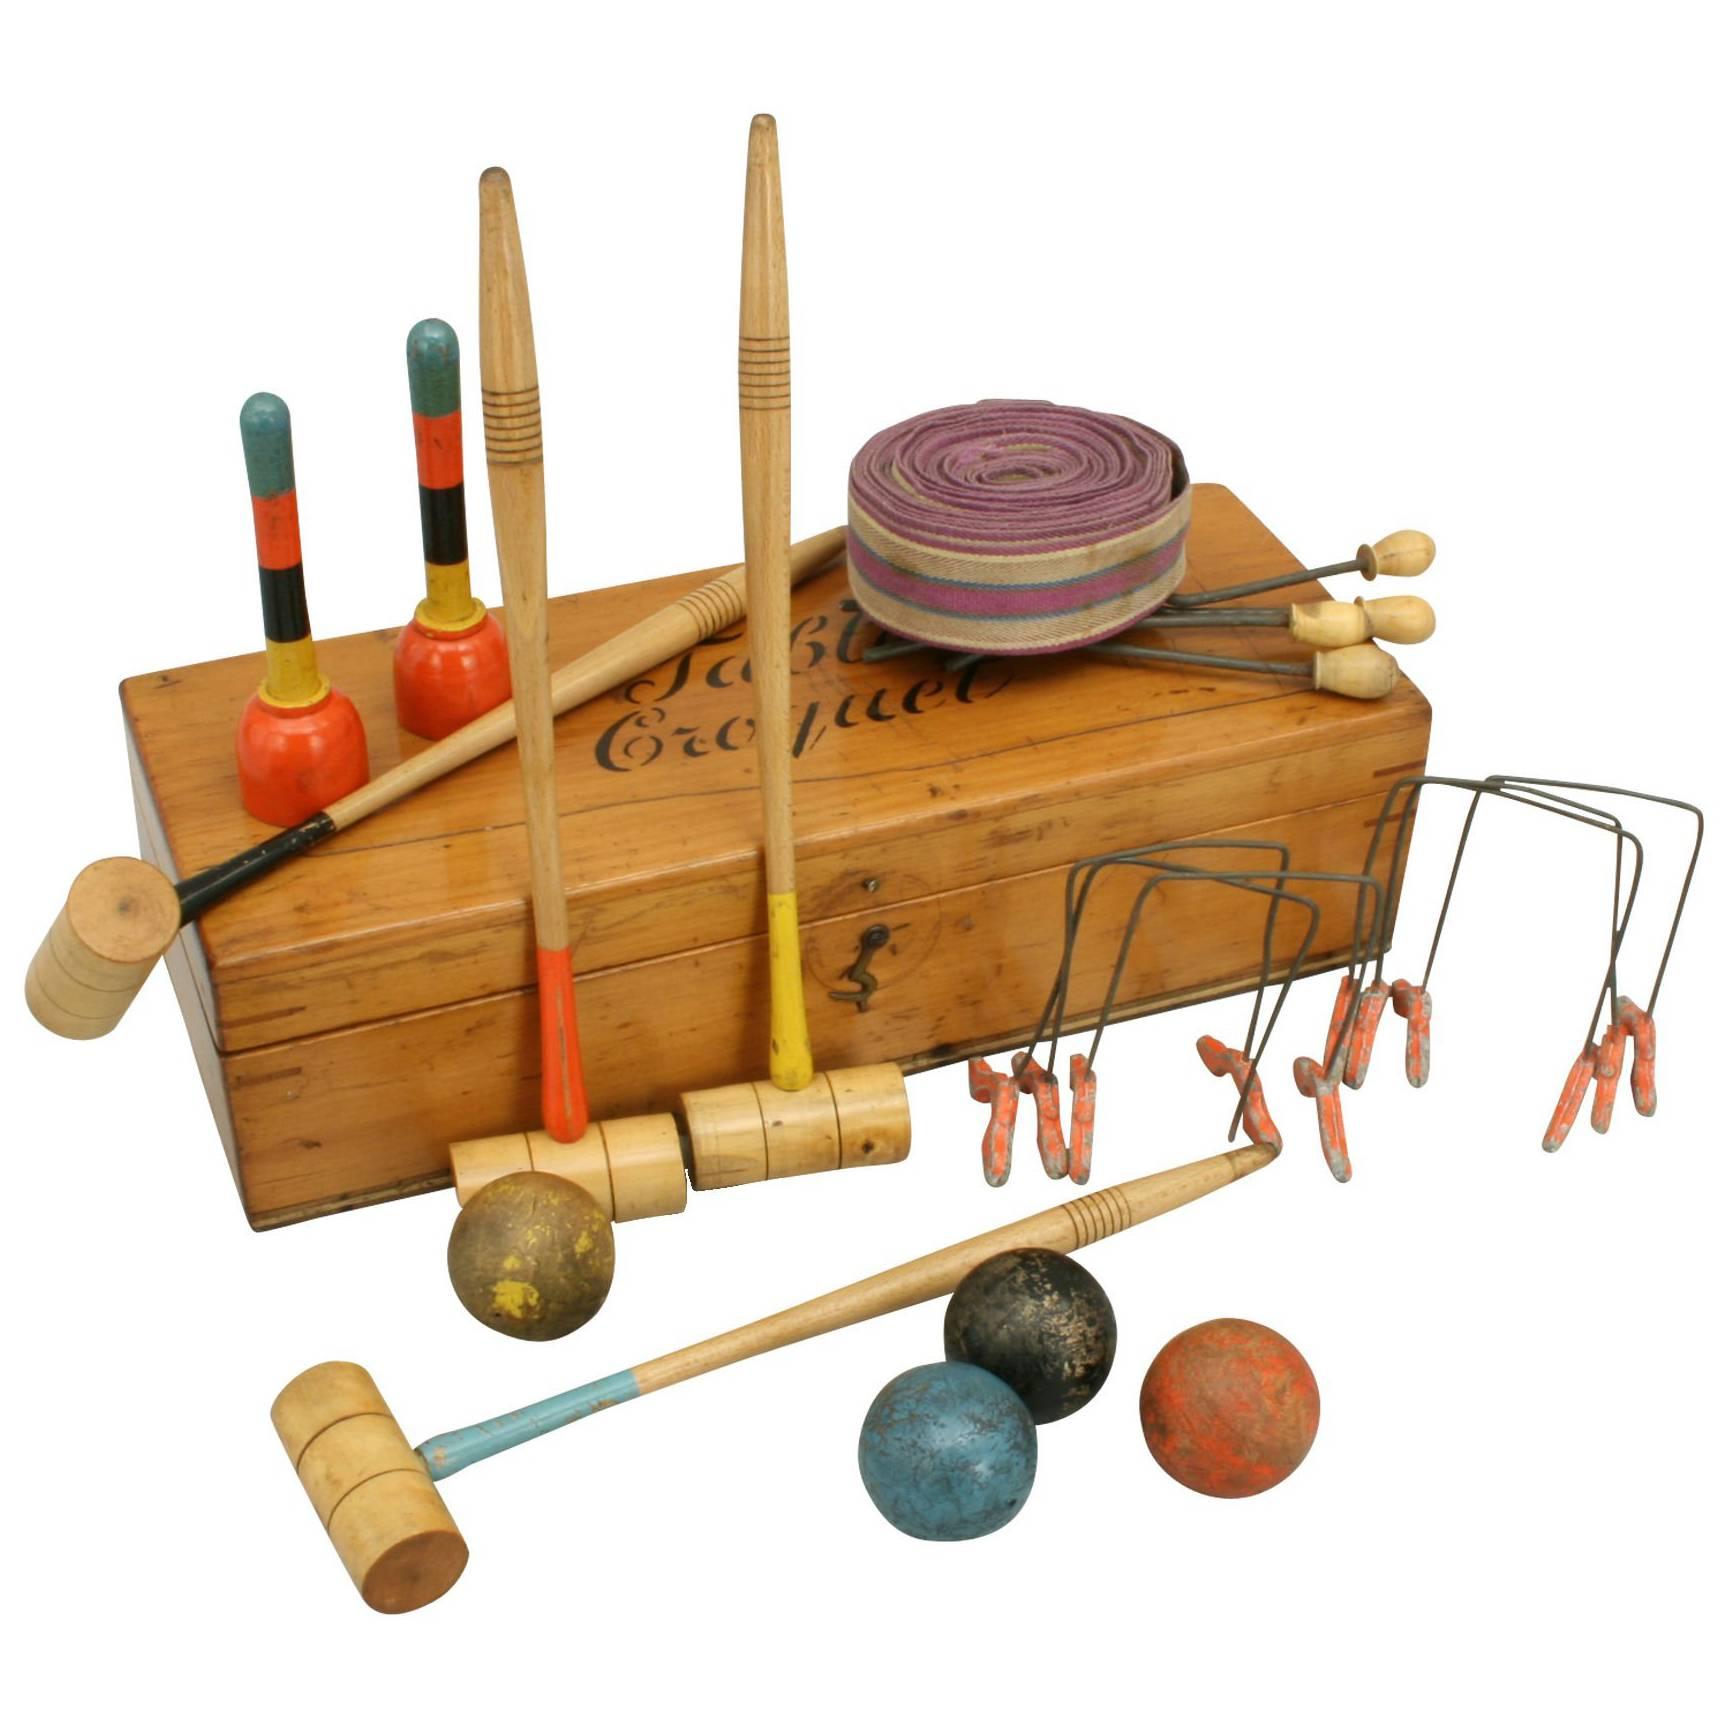 Table Croquet Set in Pine Box